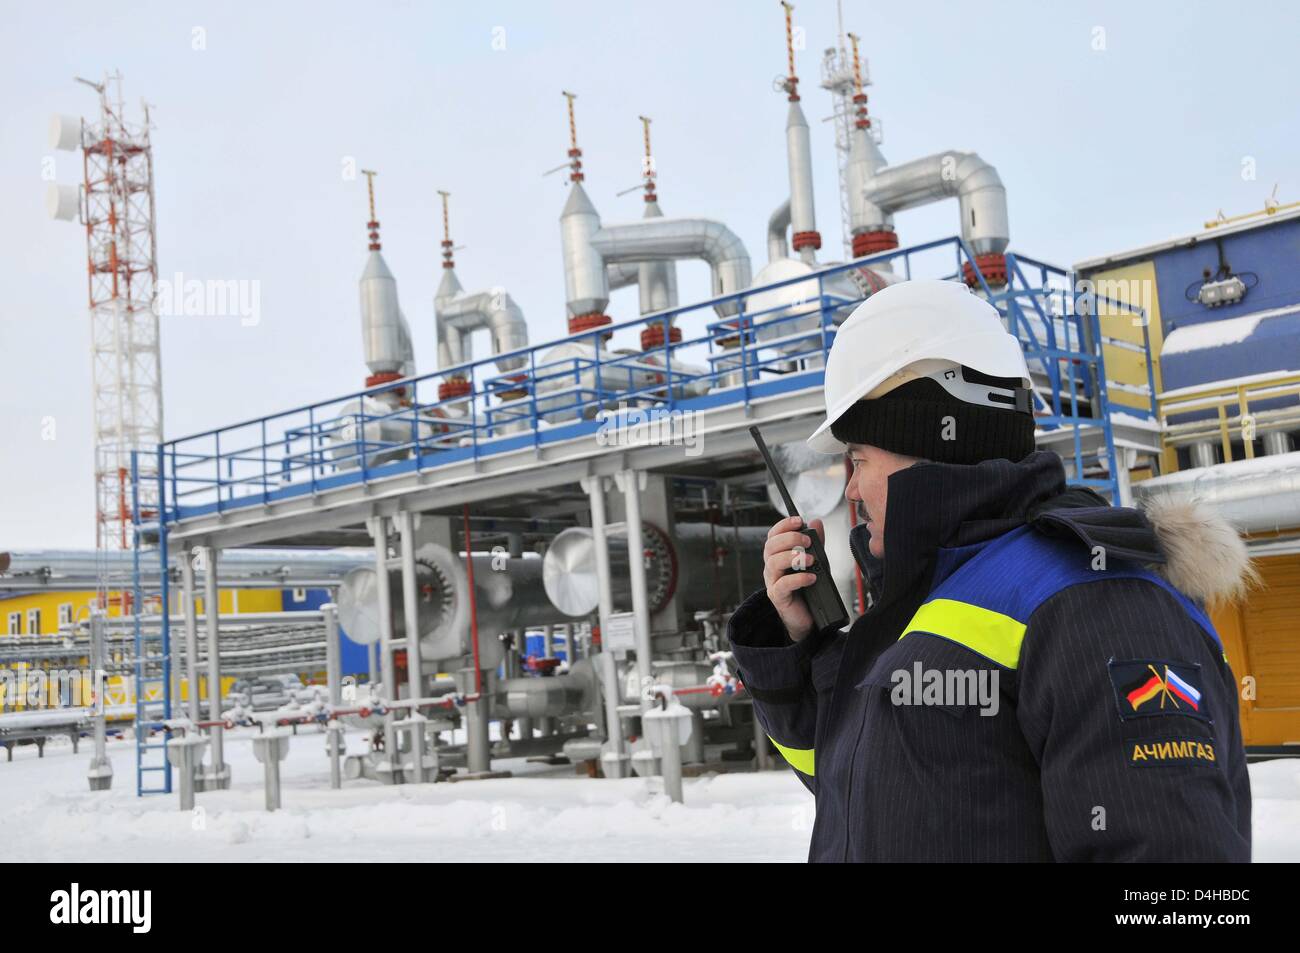 A staff member of Achimgaz pictured in the new gas treatment plant in Novy Urengoi, Russia, 12 November 2008. The German-Russian joint venture ZAO Achimgaz of German Wintershall and Russian Gazprom started natural gas extraction from the Achimov formation. Photo: Uwe Zucchi Stock Photo